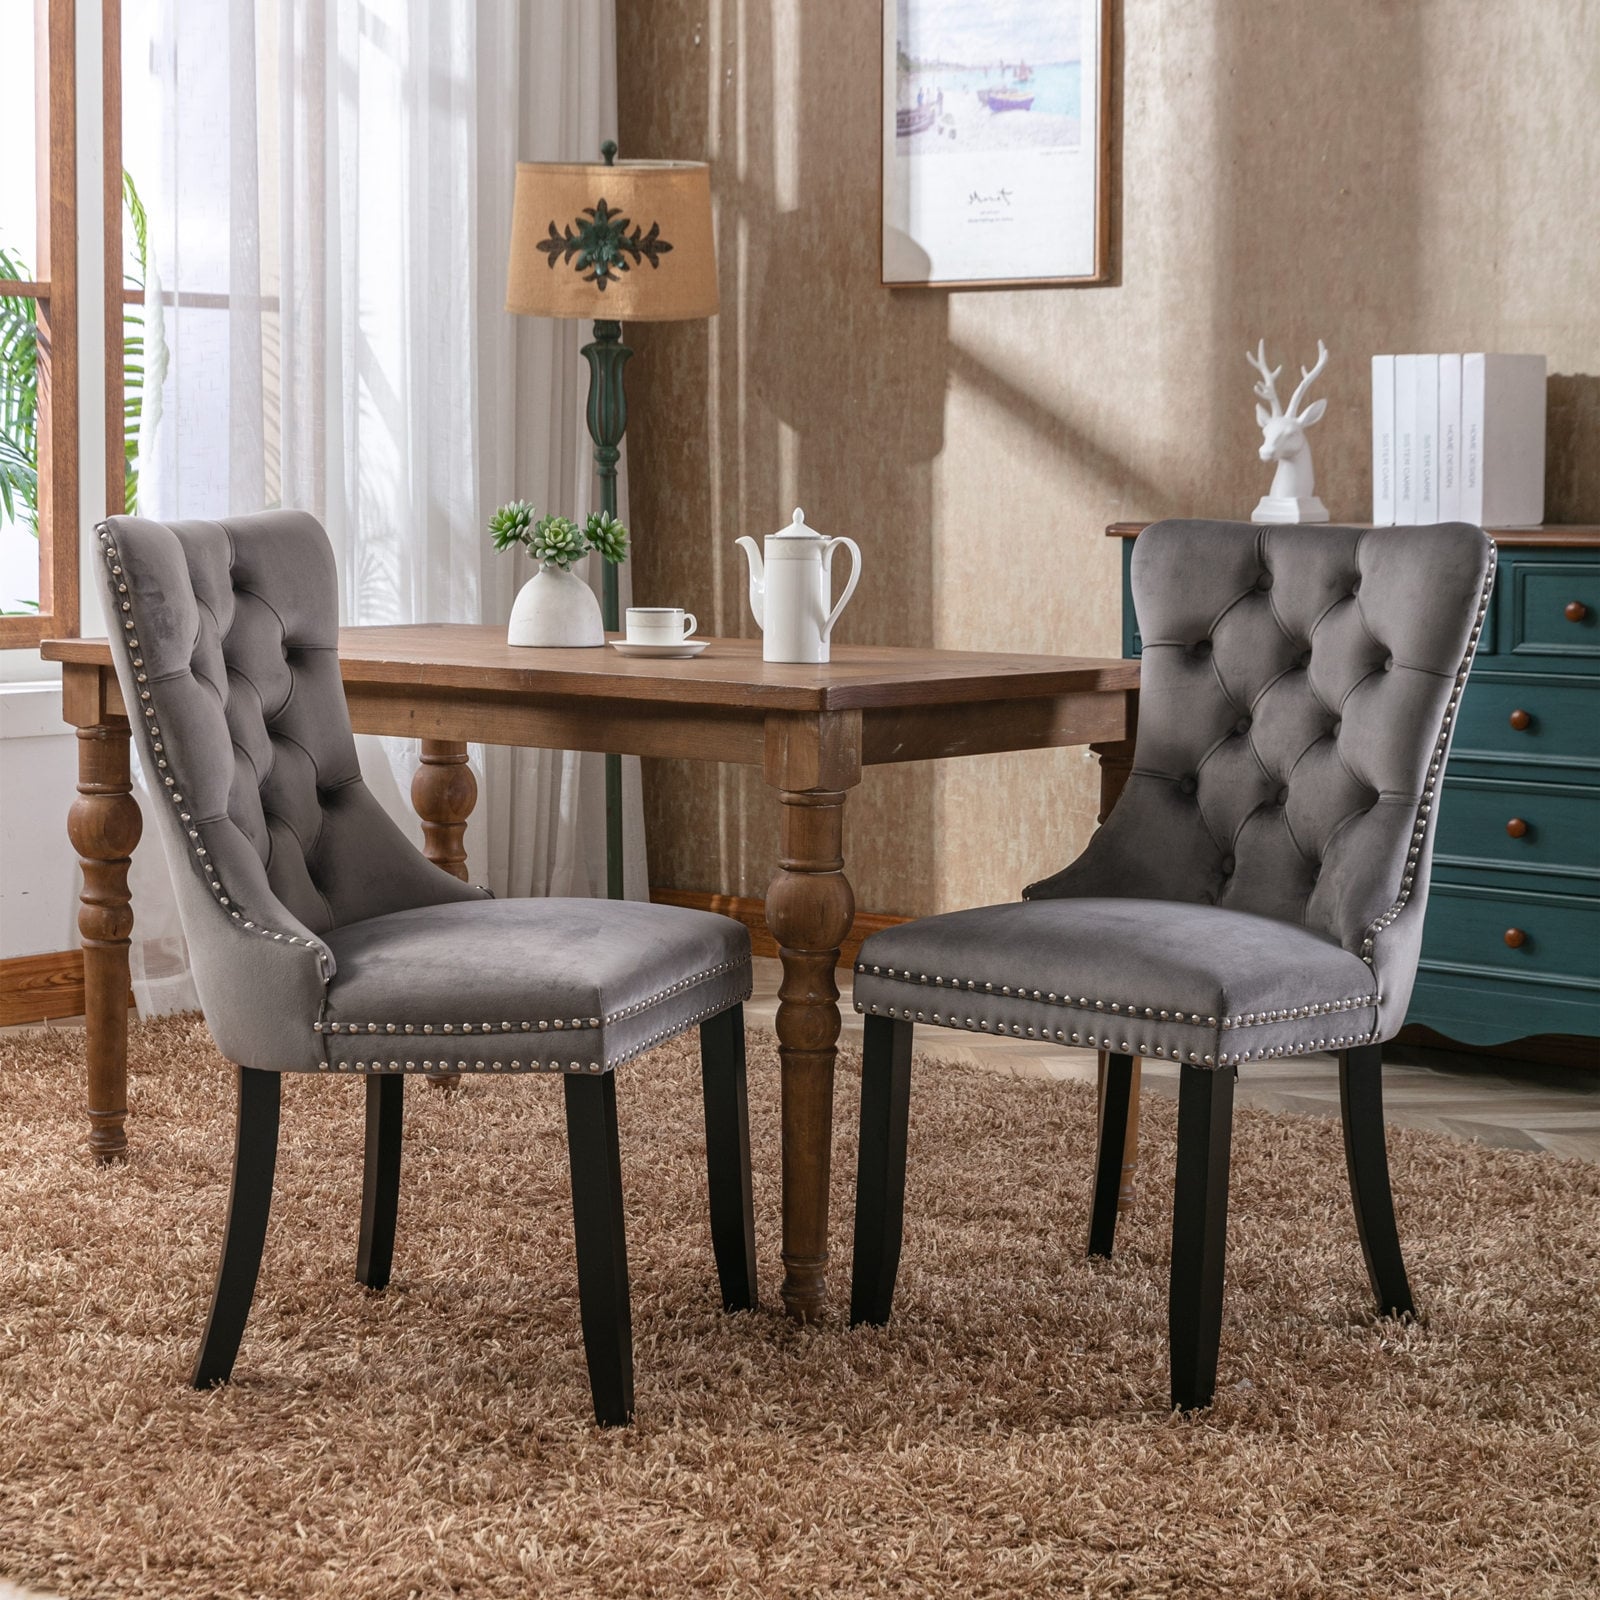 Costway Dining Chair Upholstered Set of 2 Vintage Wooden Dining Chair - See Details - Greyish Brown